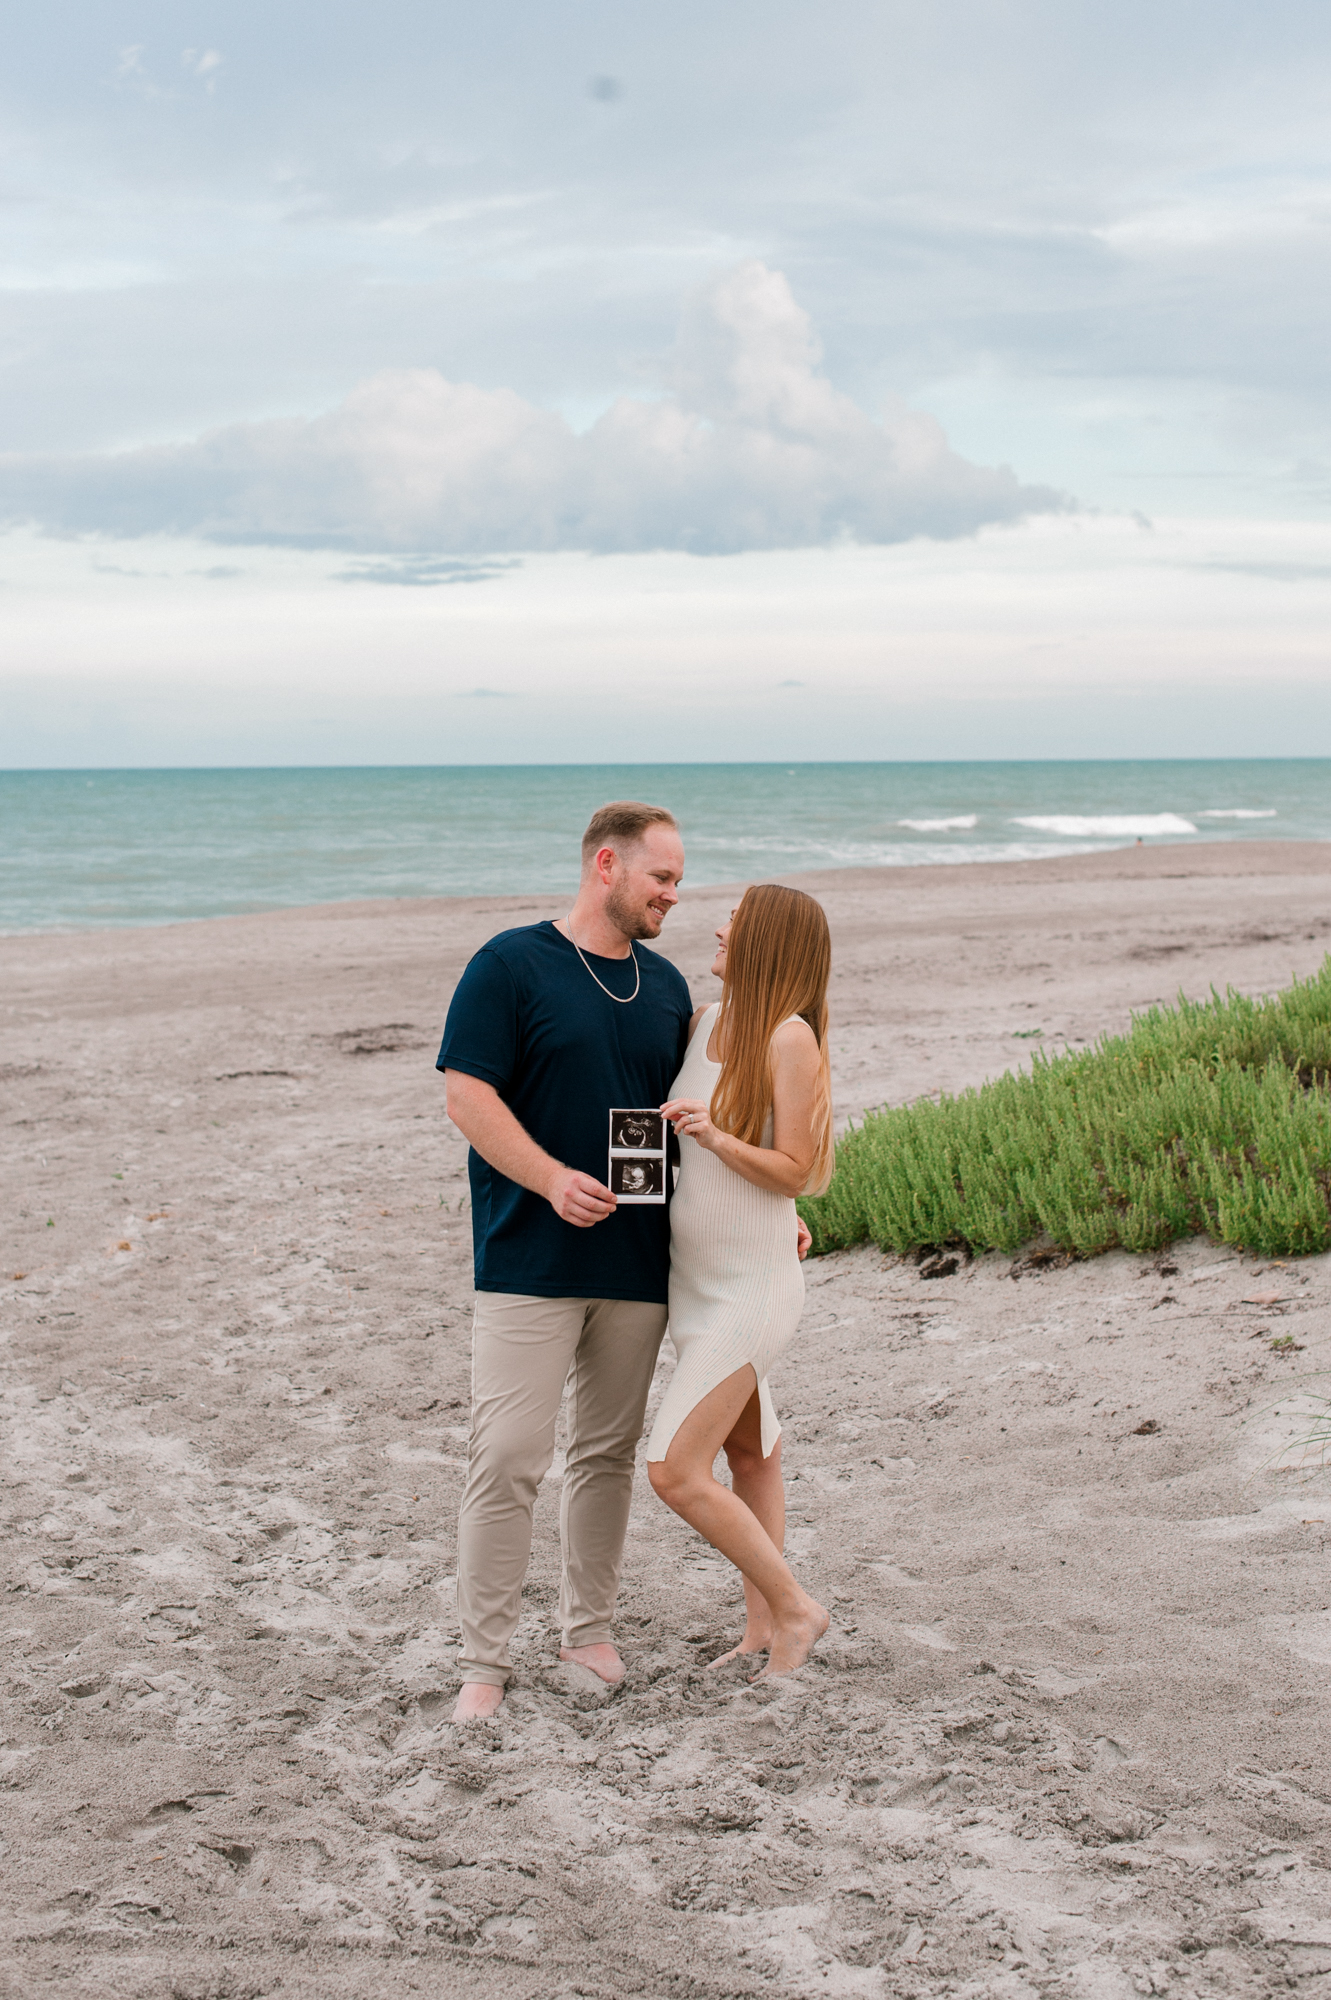 New parents pose on the beach near the dunes holding an ultrasound picture of their growing baby boy orlando prenatal massage